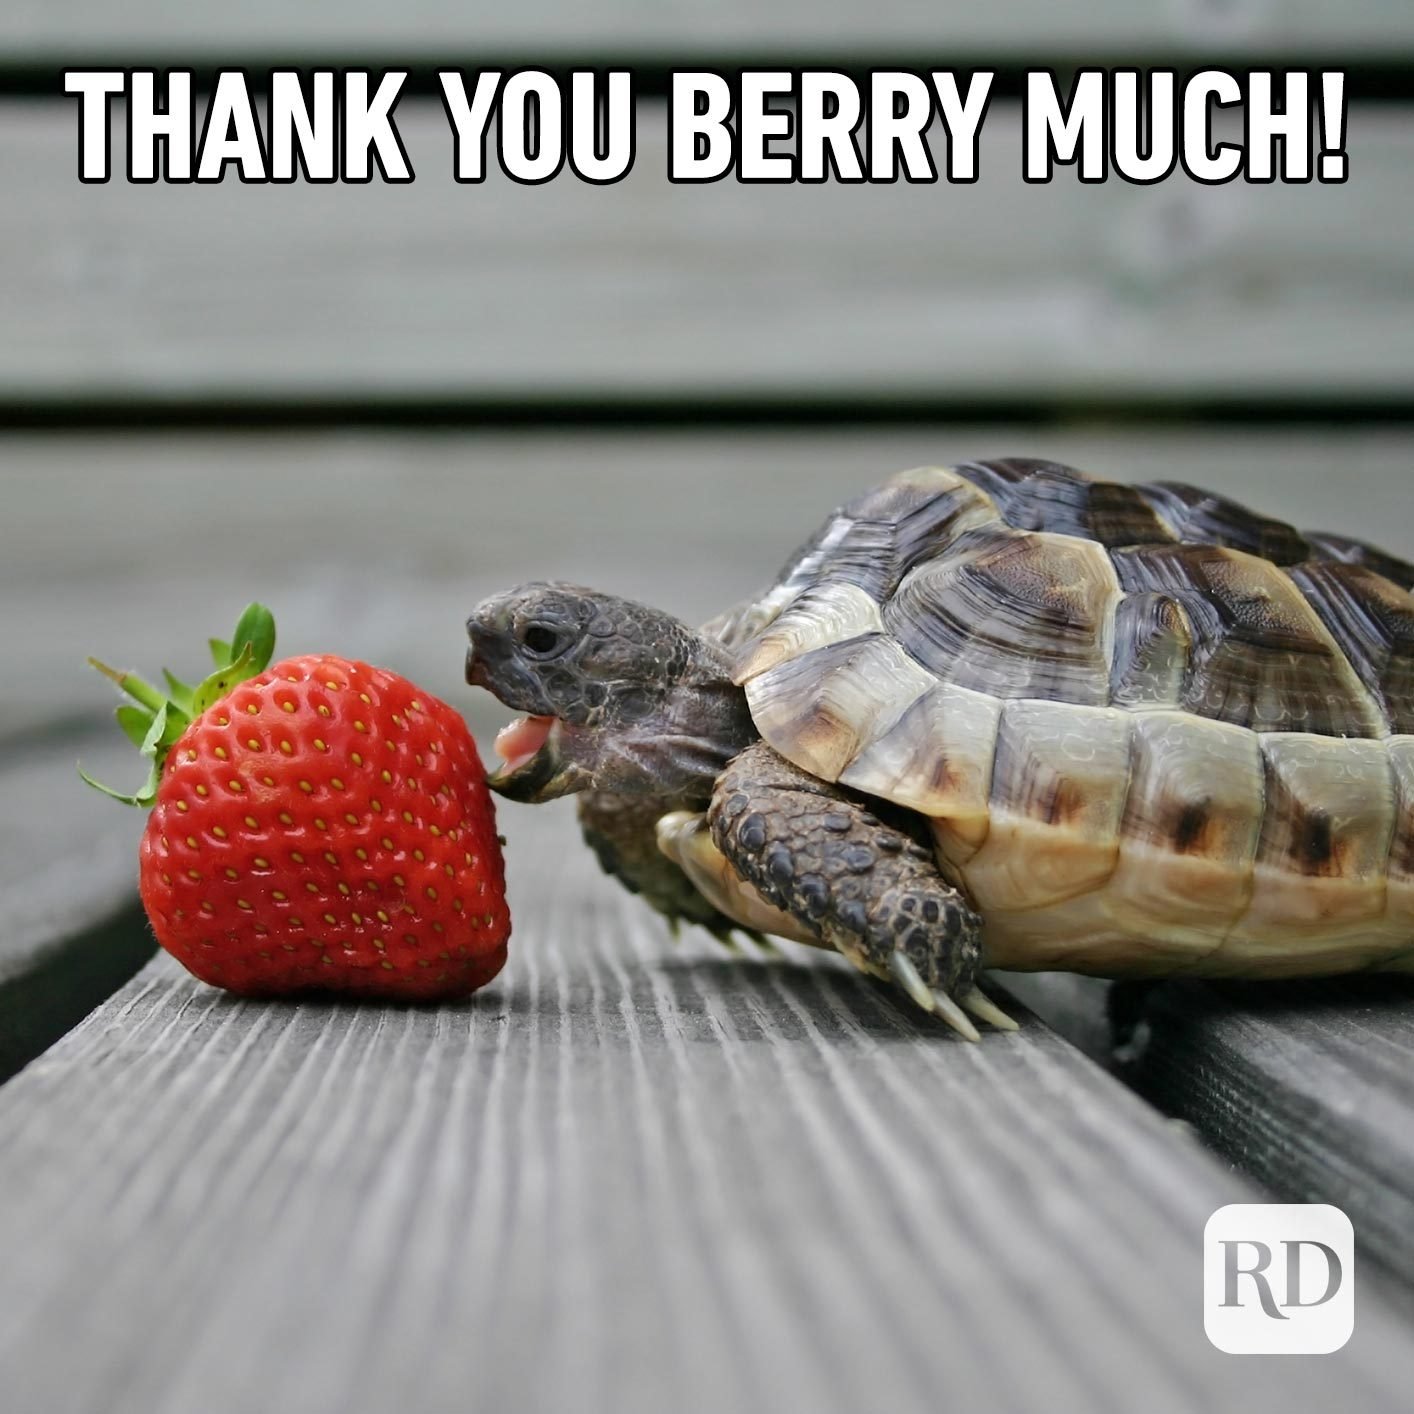 30 Funny Thank You Memes for Every Occasion